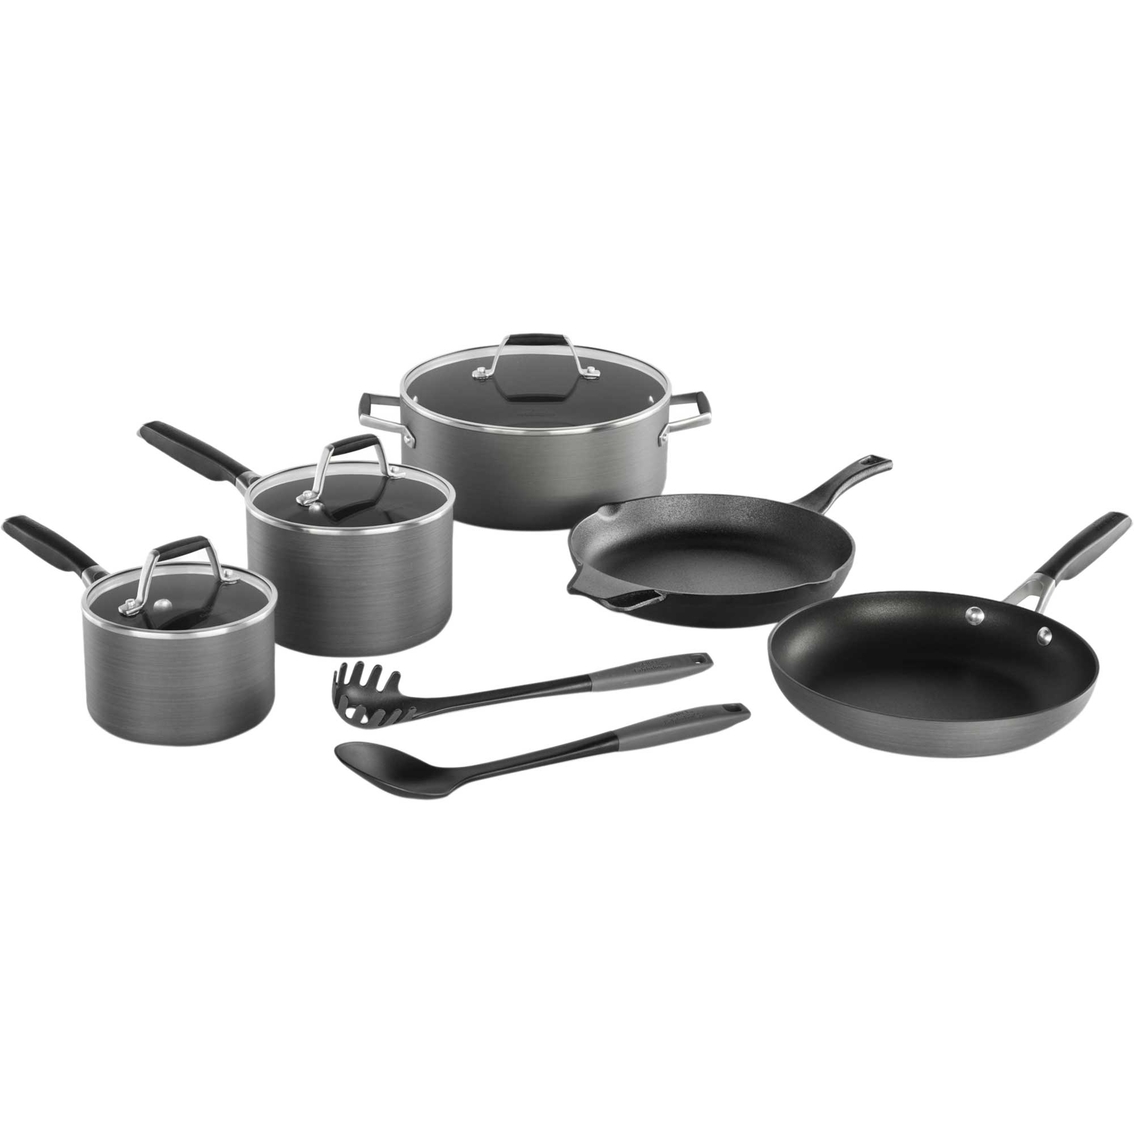 Calphalon Hard Anodized Nonstick Pots And Pans 10 Pc. Cookware Set, Cookware Sets, Household